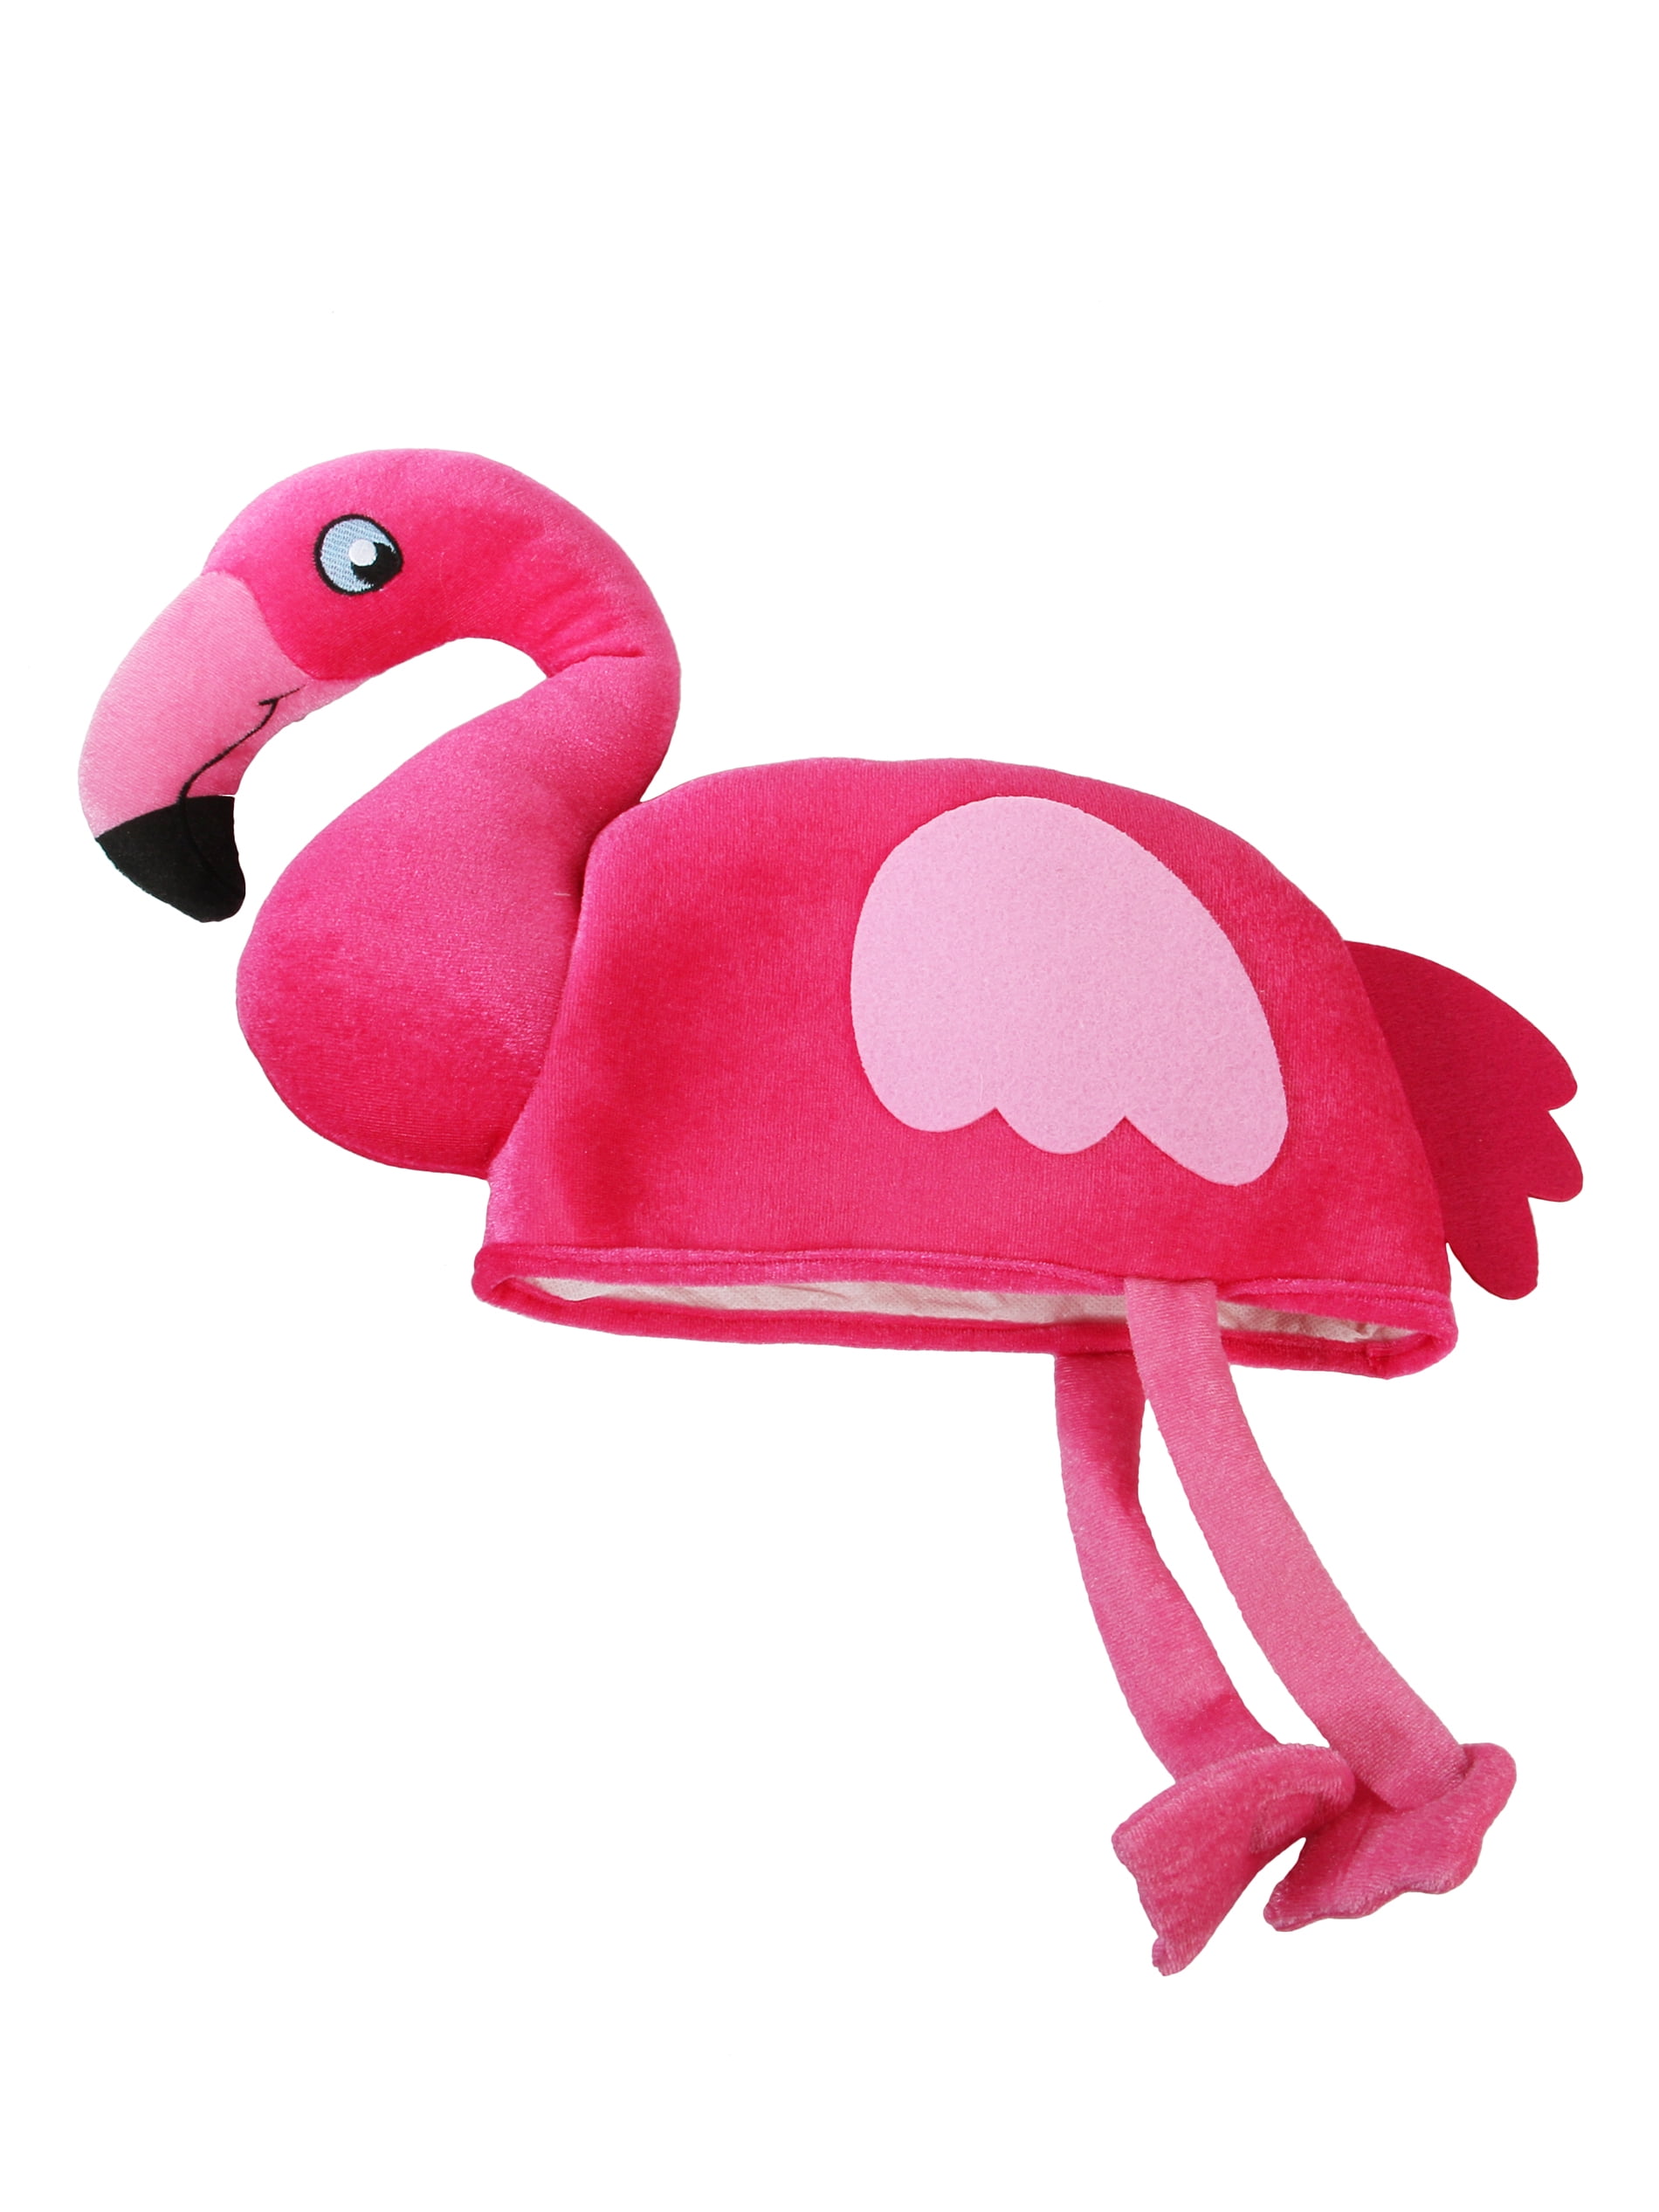 Pink Flamingo Bird Hat Funny Silly Adult Halloween Party Costume Accessory 